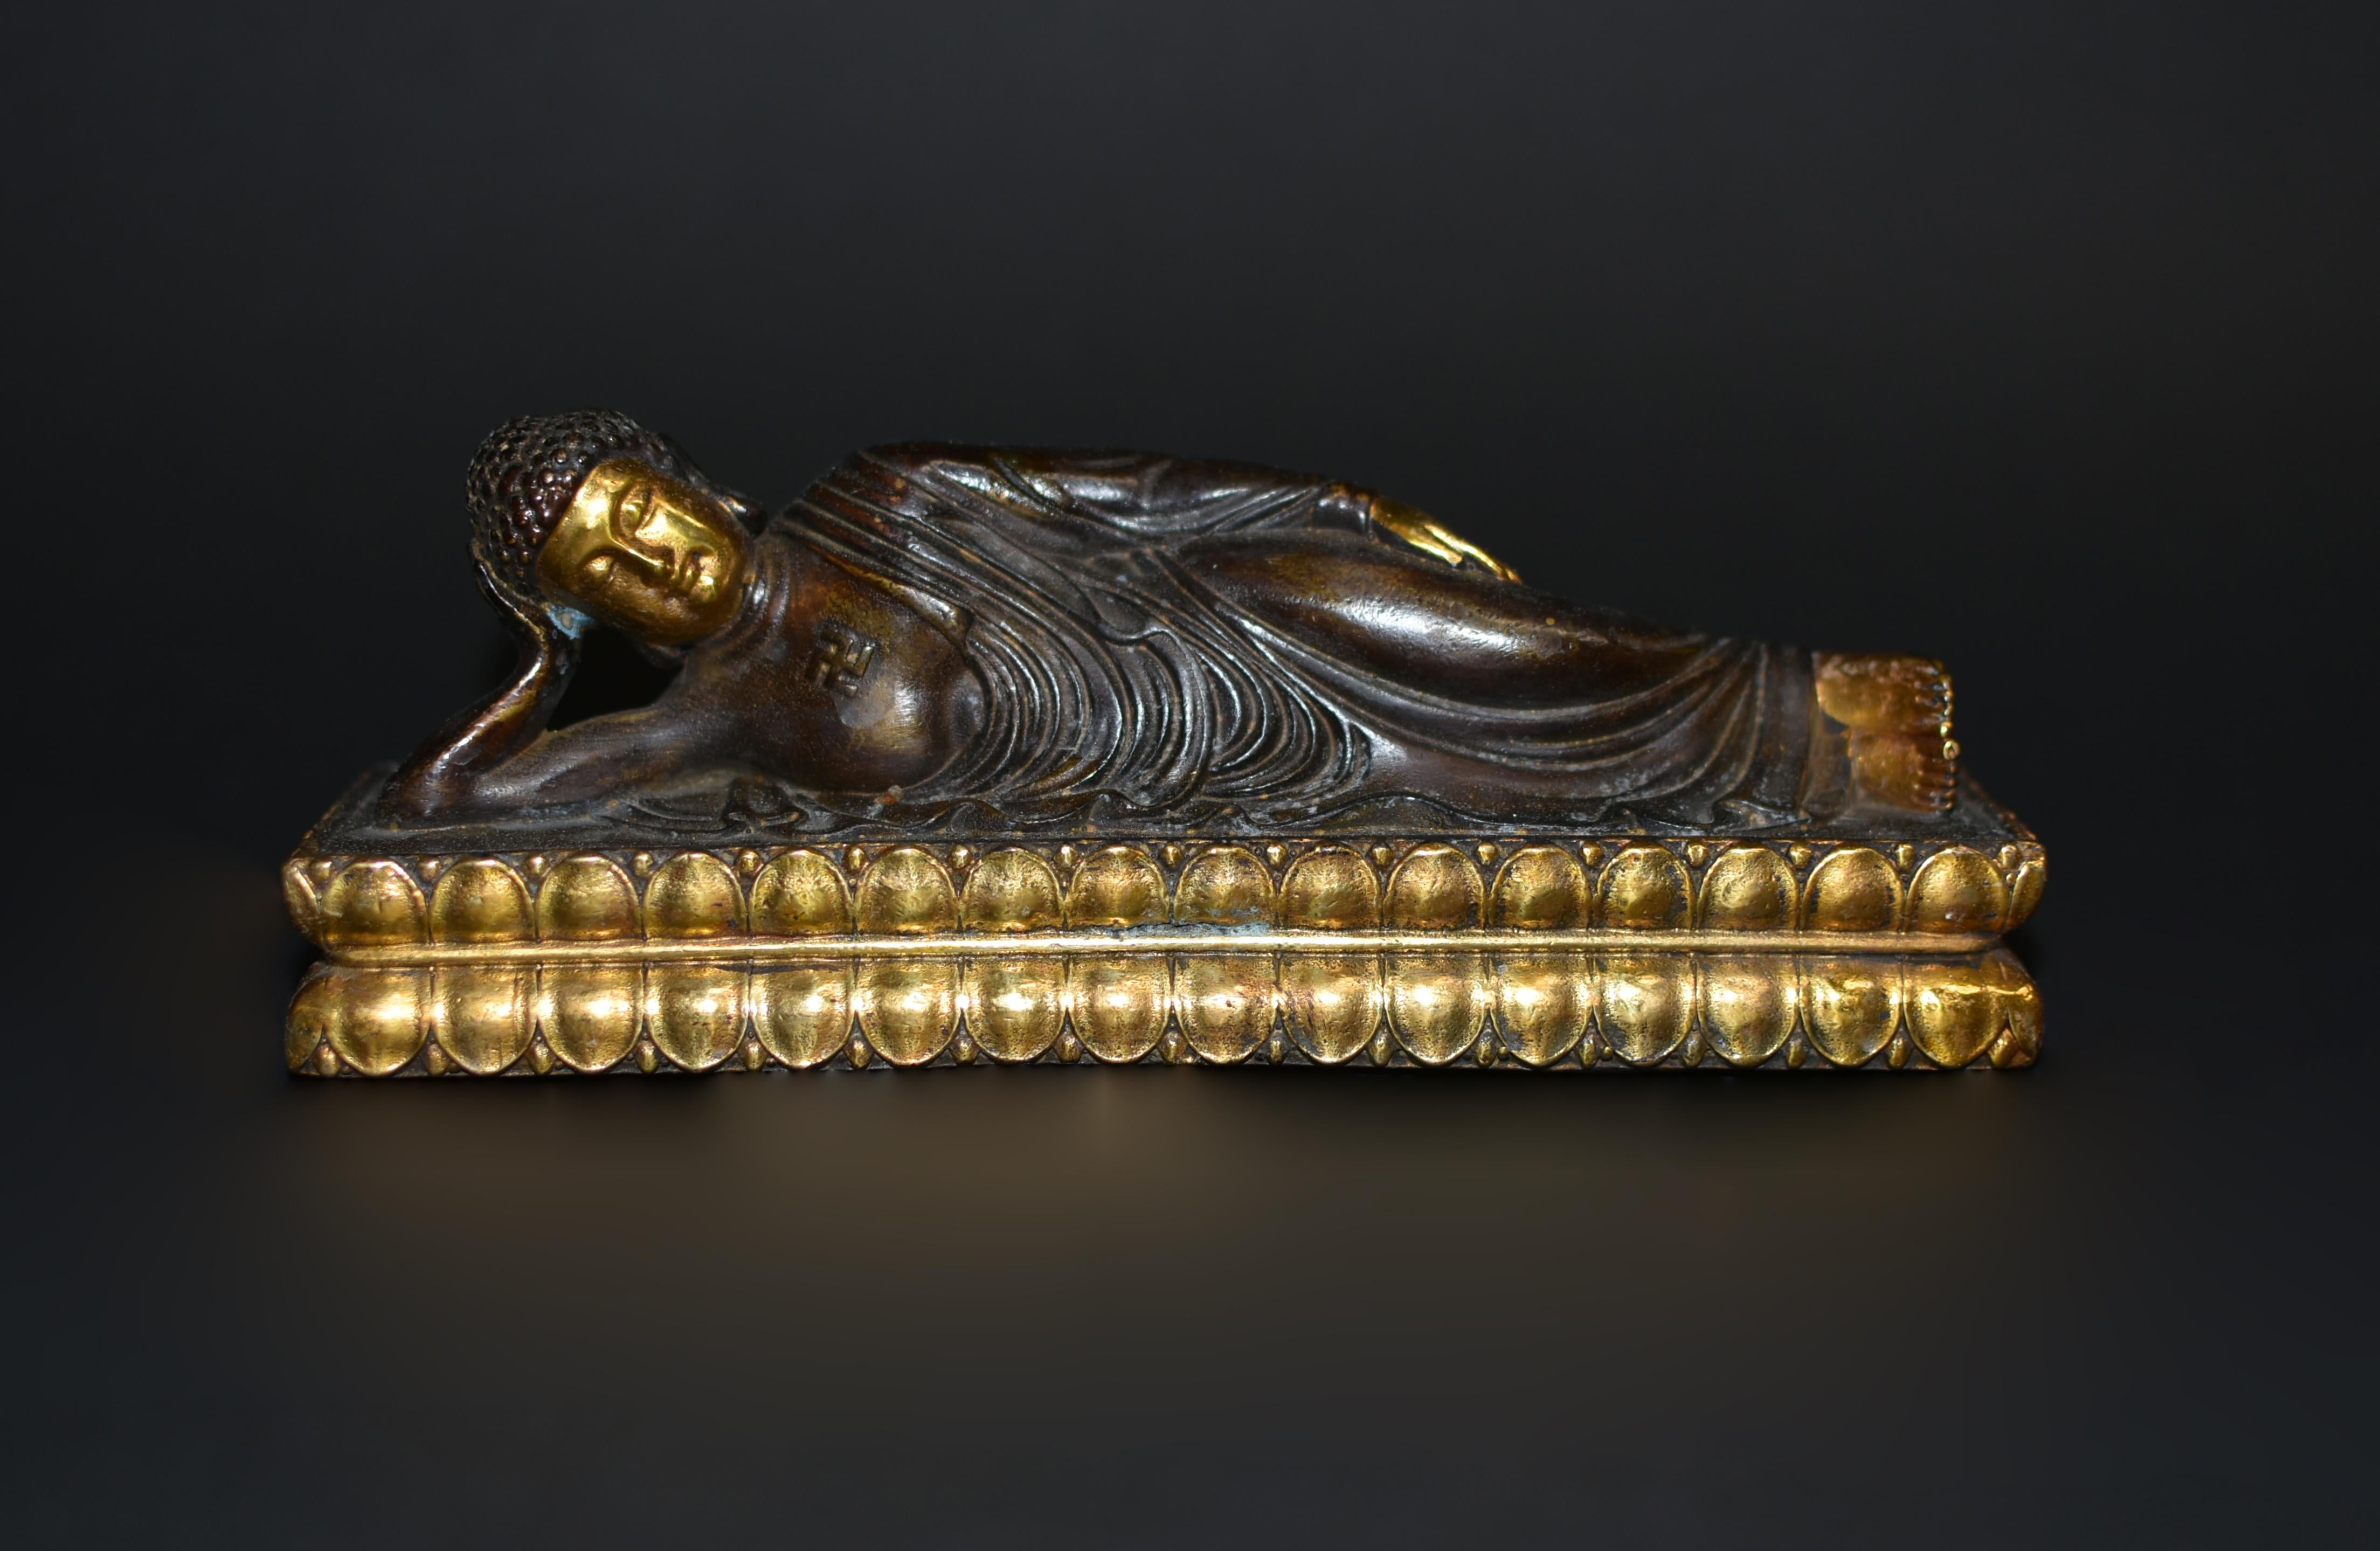 A finely made gilt bronze reclining Buddha. Lying on his right side with flexed feet on double lotus throne, Buddha has Tang style broad face, very serene with closed eyes and long earlobes, neatly coiled hair mounted on top of his hair with